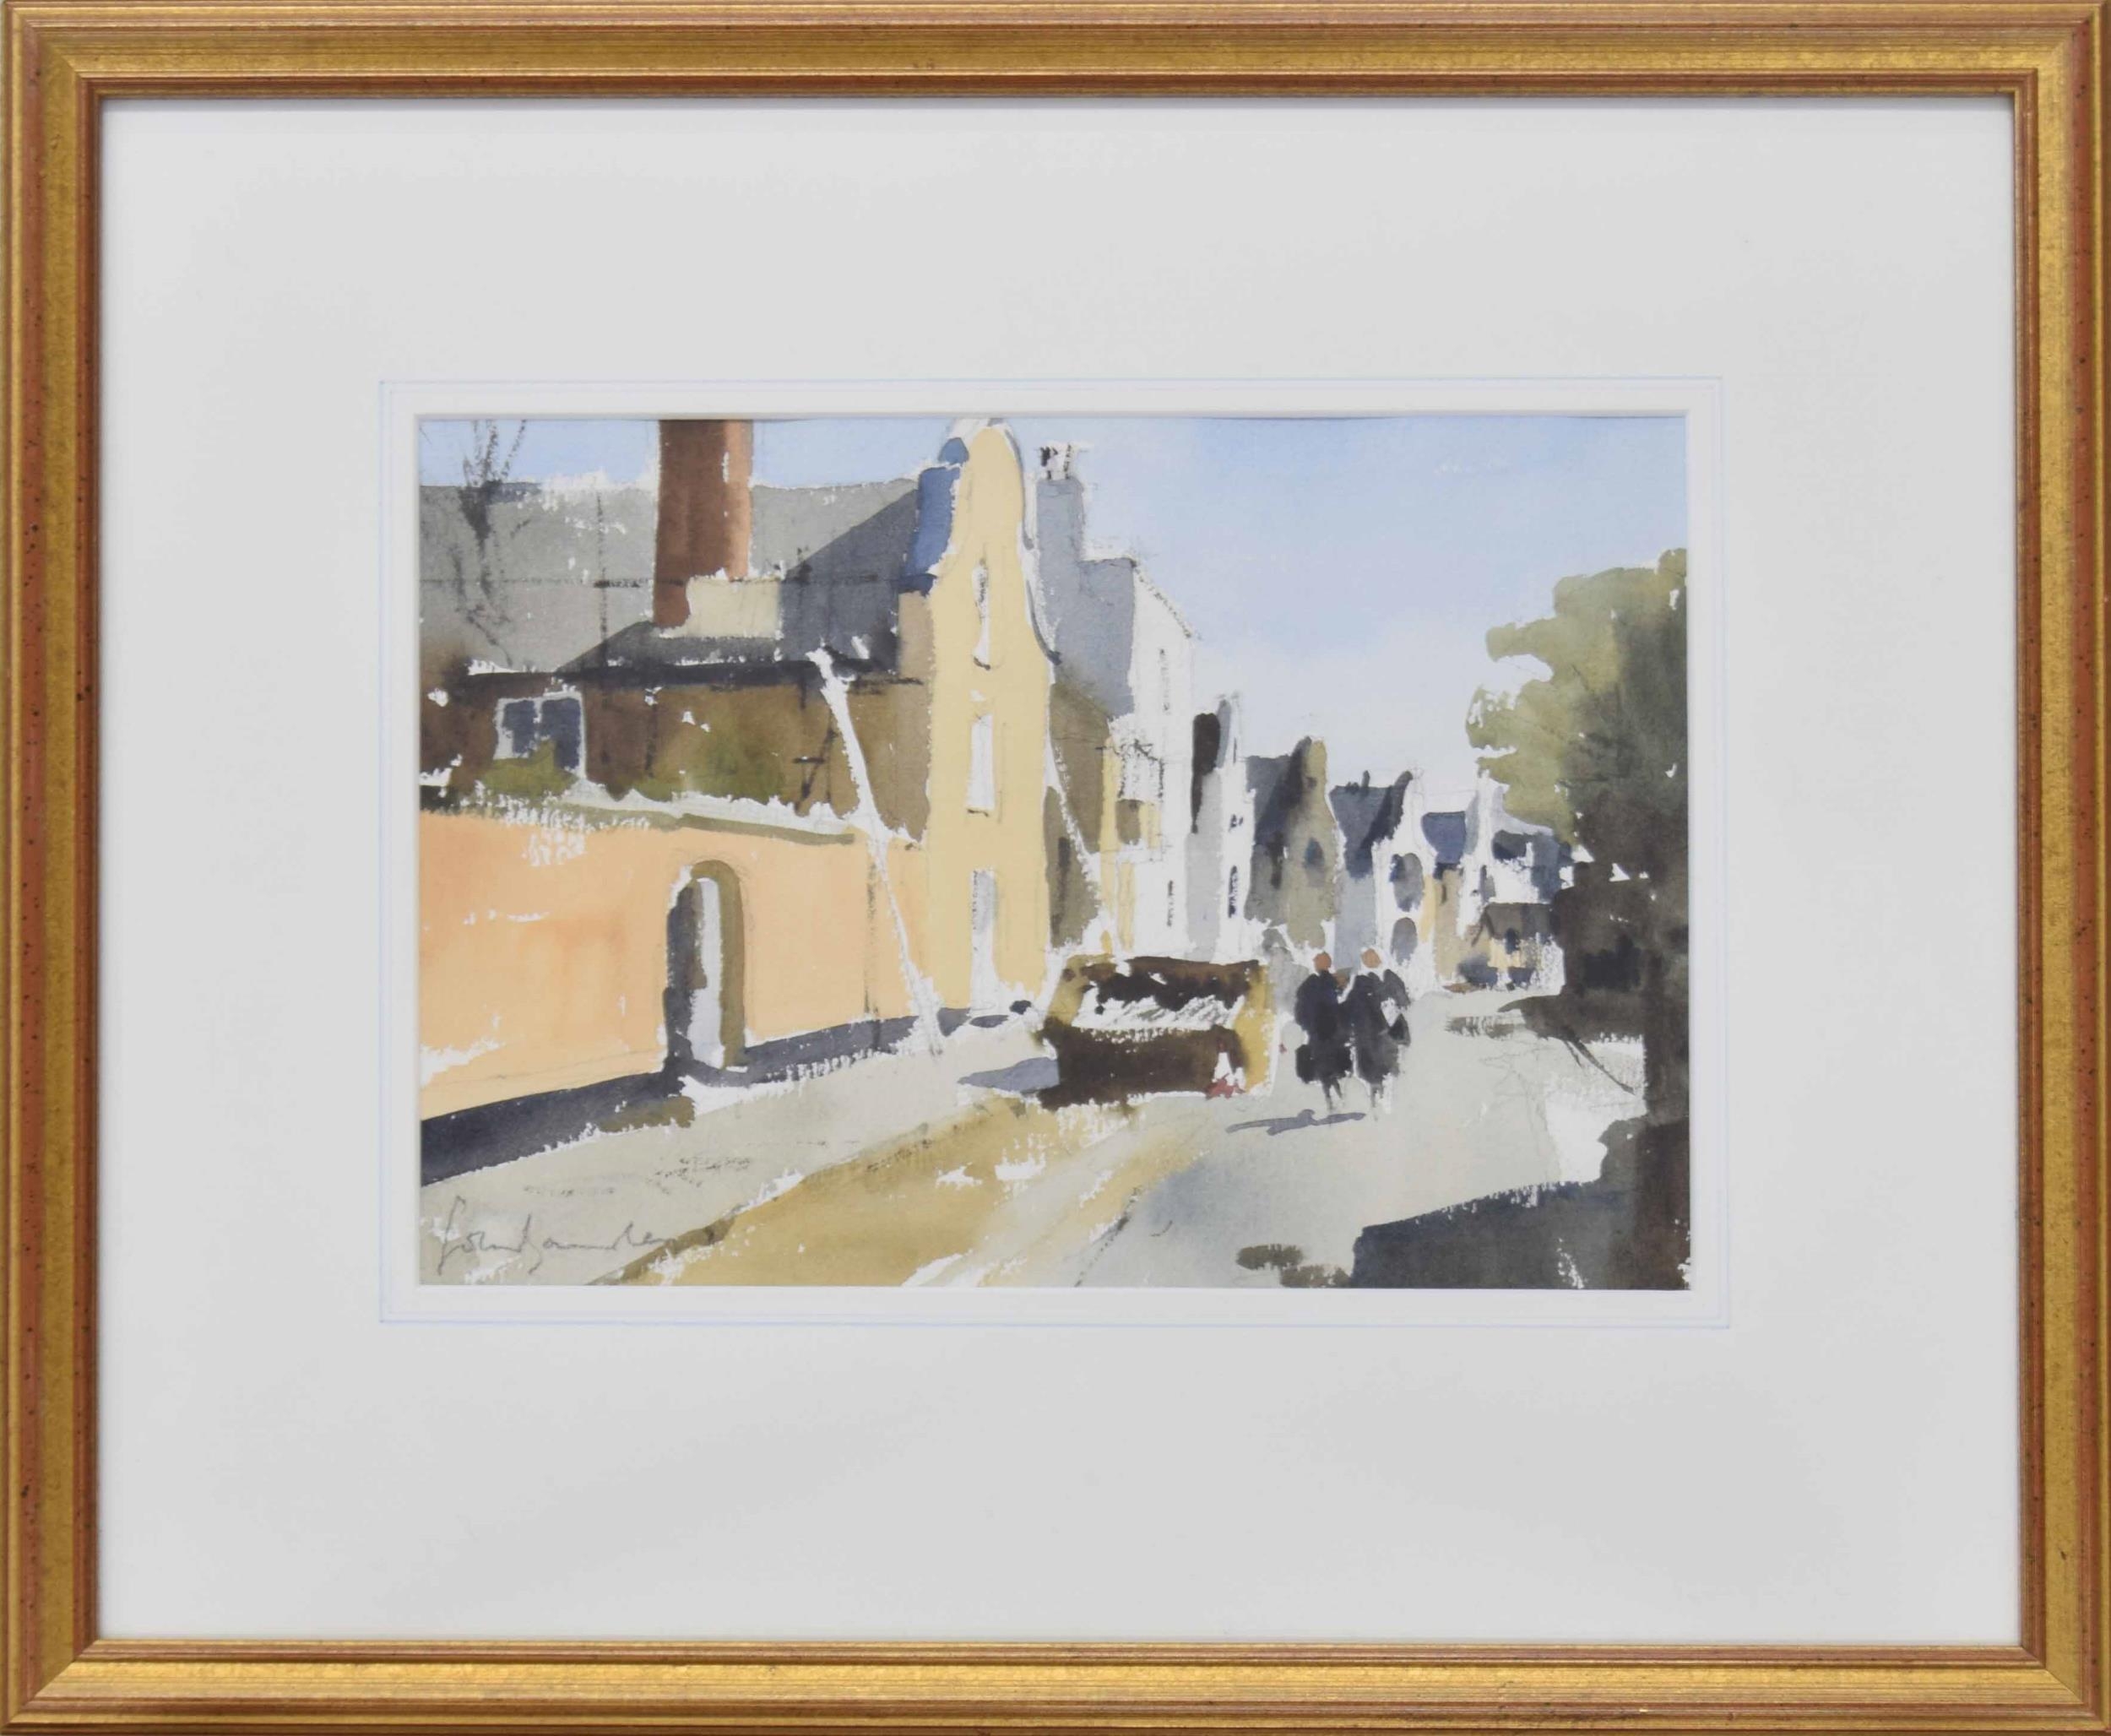 John Yardley Hon, Rtd, RI (b 1933) - 'Figures on a sunlit street' with houses nearby', signed,